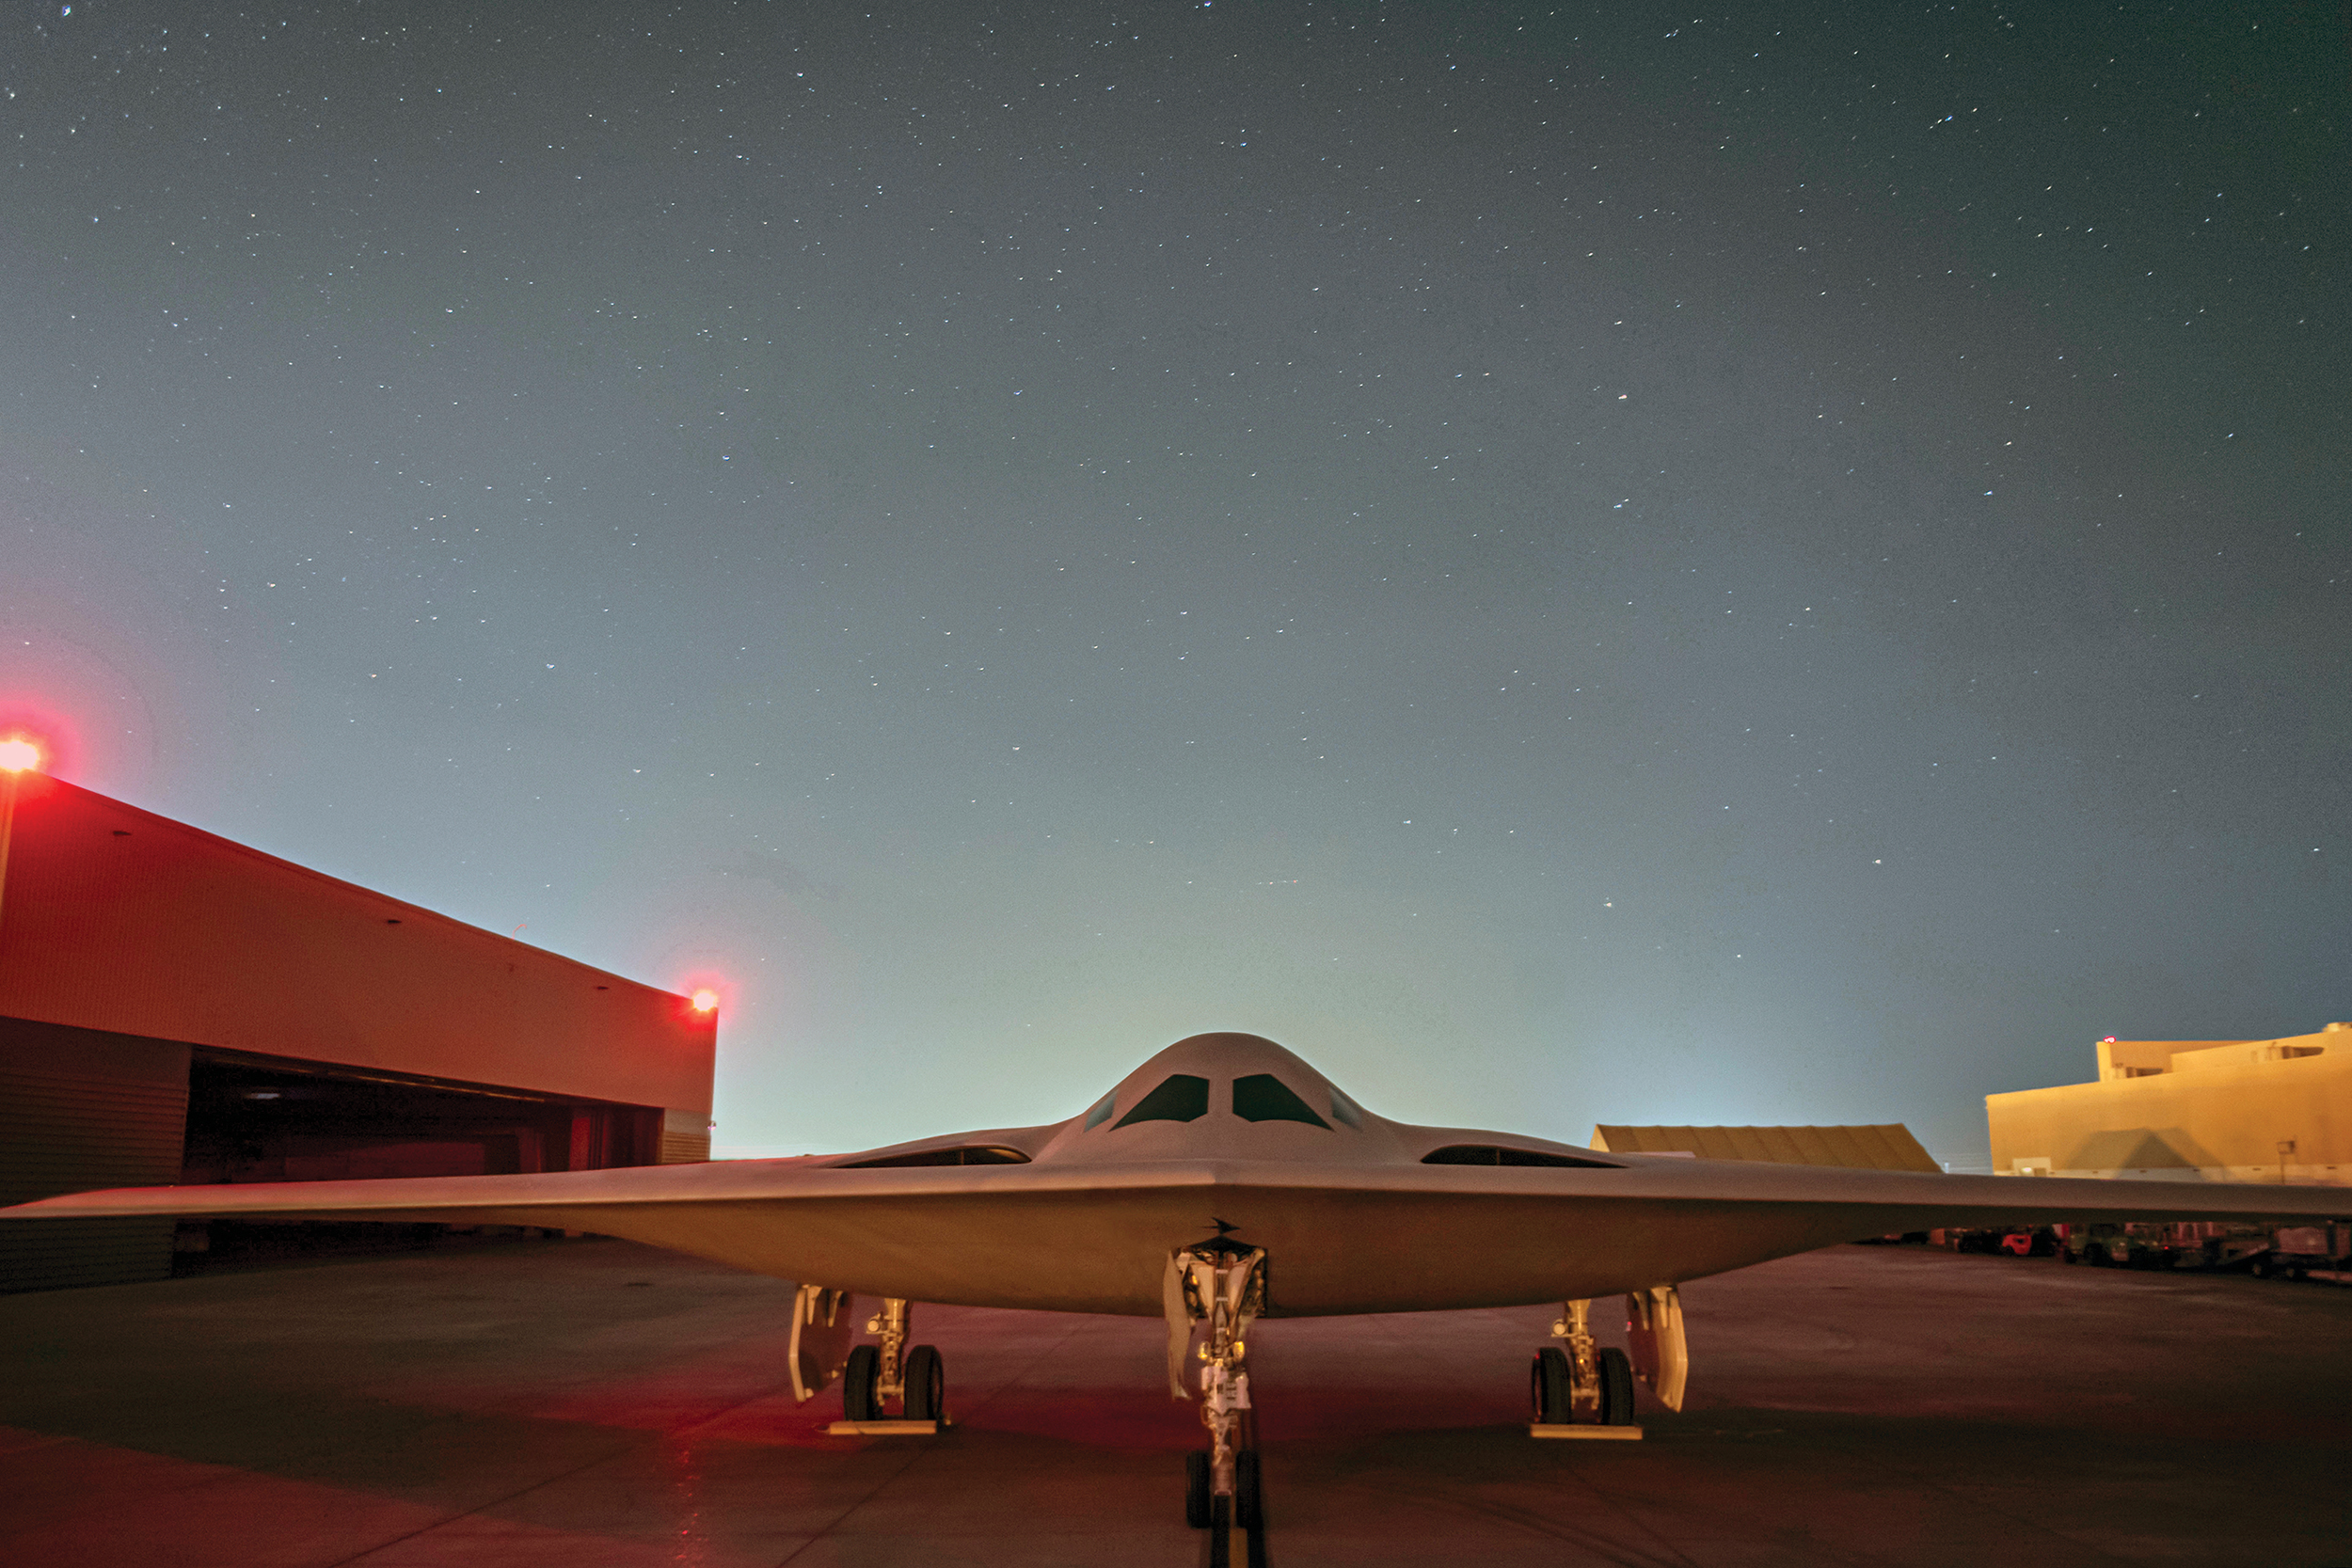 B-21 Raider is unveiled to public at ceremony on December 2, 2022, in Palmdale, California